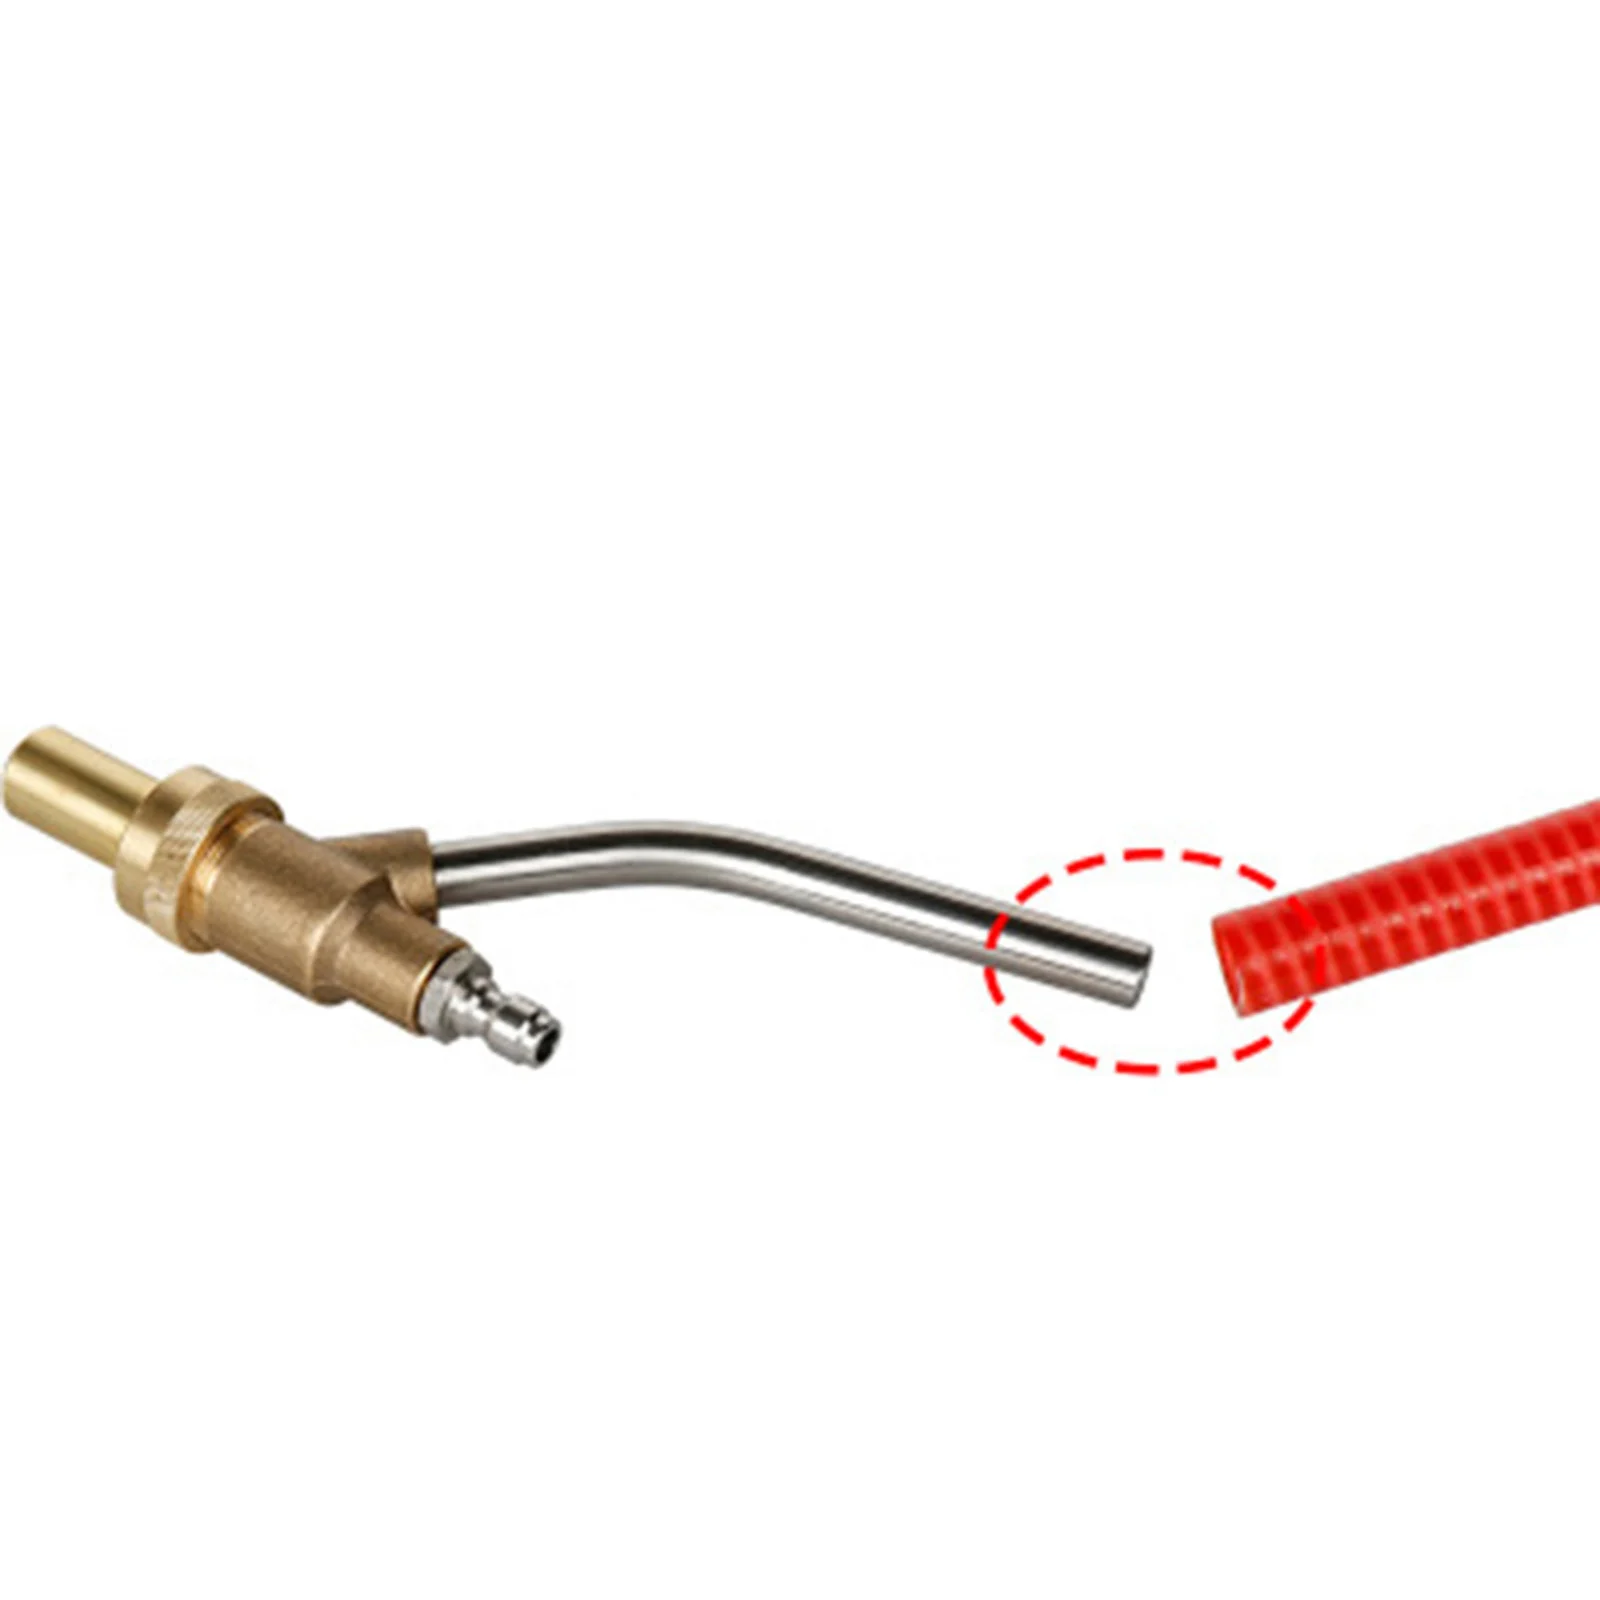 21cm Hose Pipe Joint Connector Sand Blasting High Pressure Washer Cleaning Spray